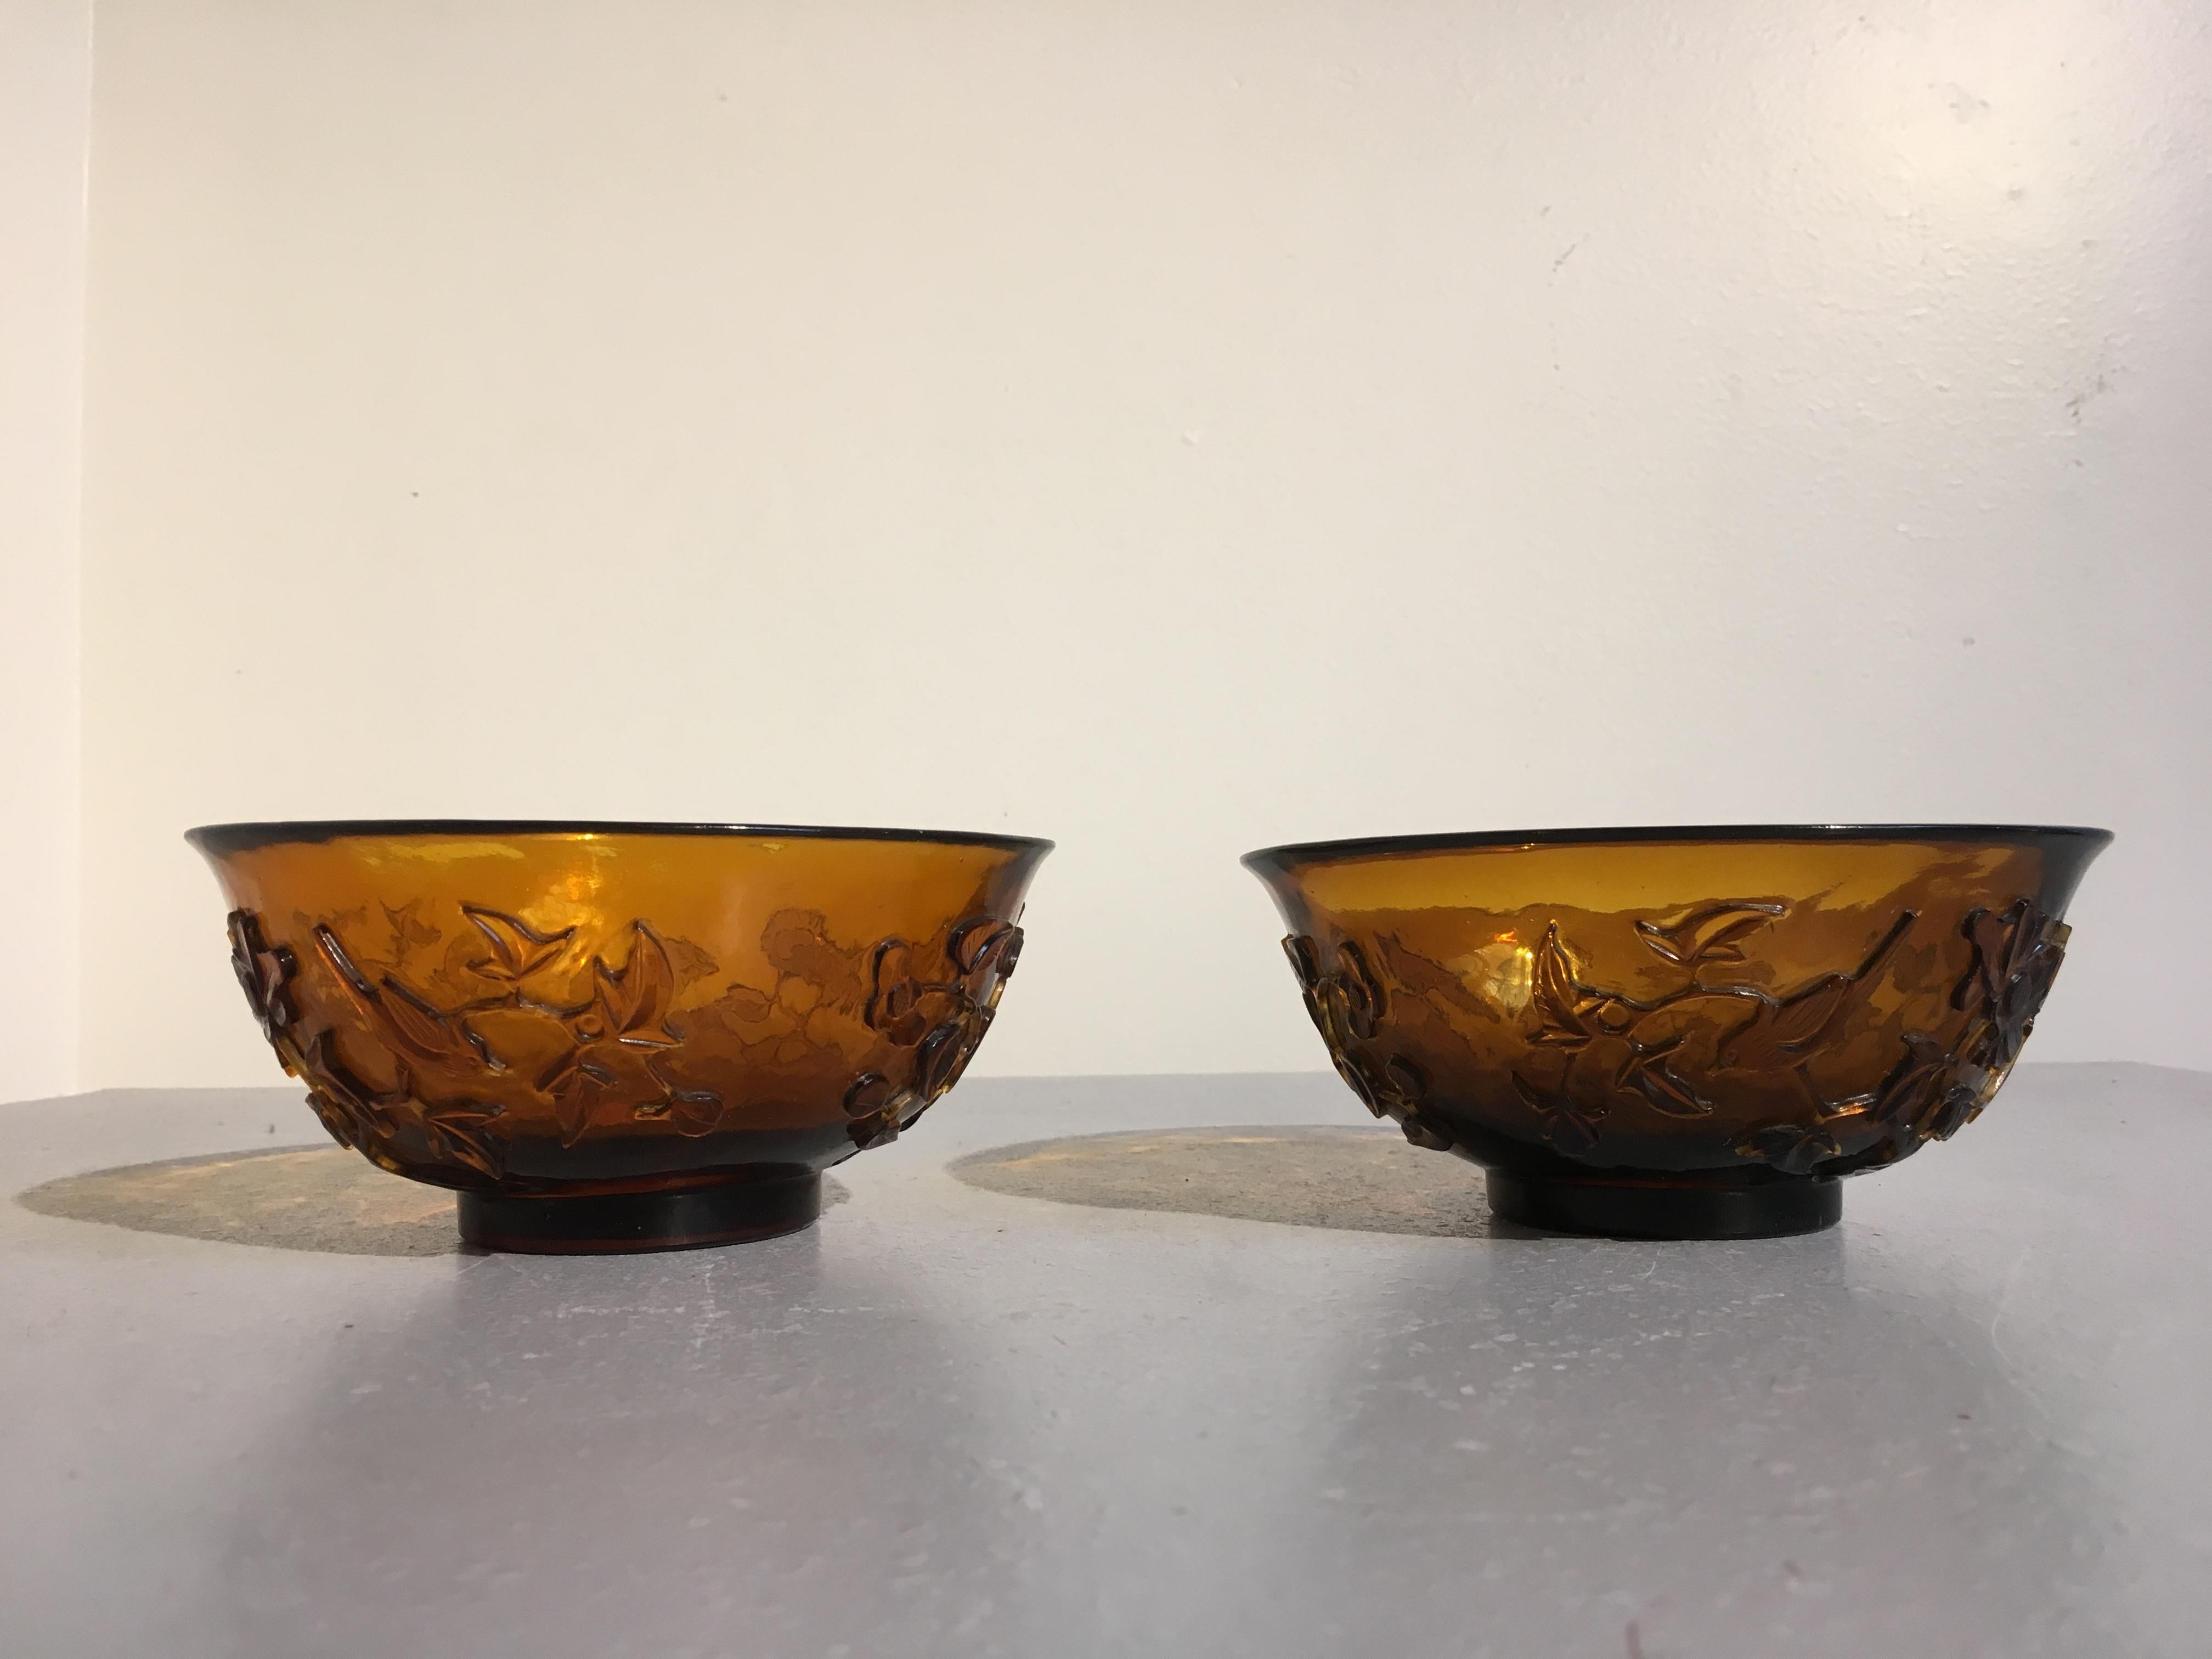 A fine pair of late 19th century Chinese Qing dynasty carved Peking glass bowls in a lovely amber hue. 
The matching Peking glass bowls carved with opposing scenes of birds amongst flowering branches on a rocky outcrop. The amber glass bowls with